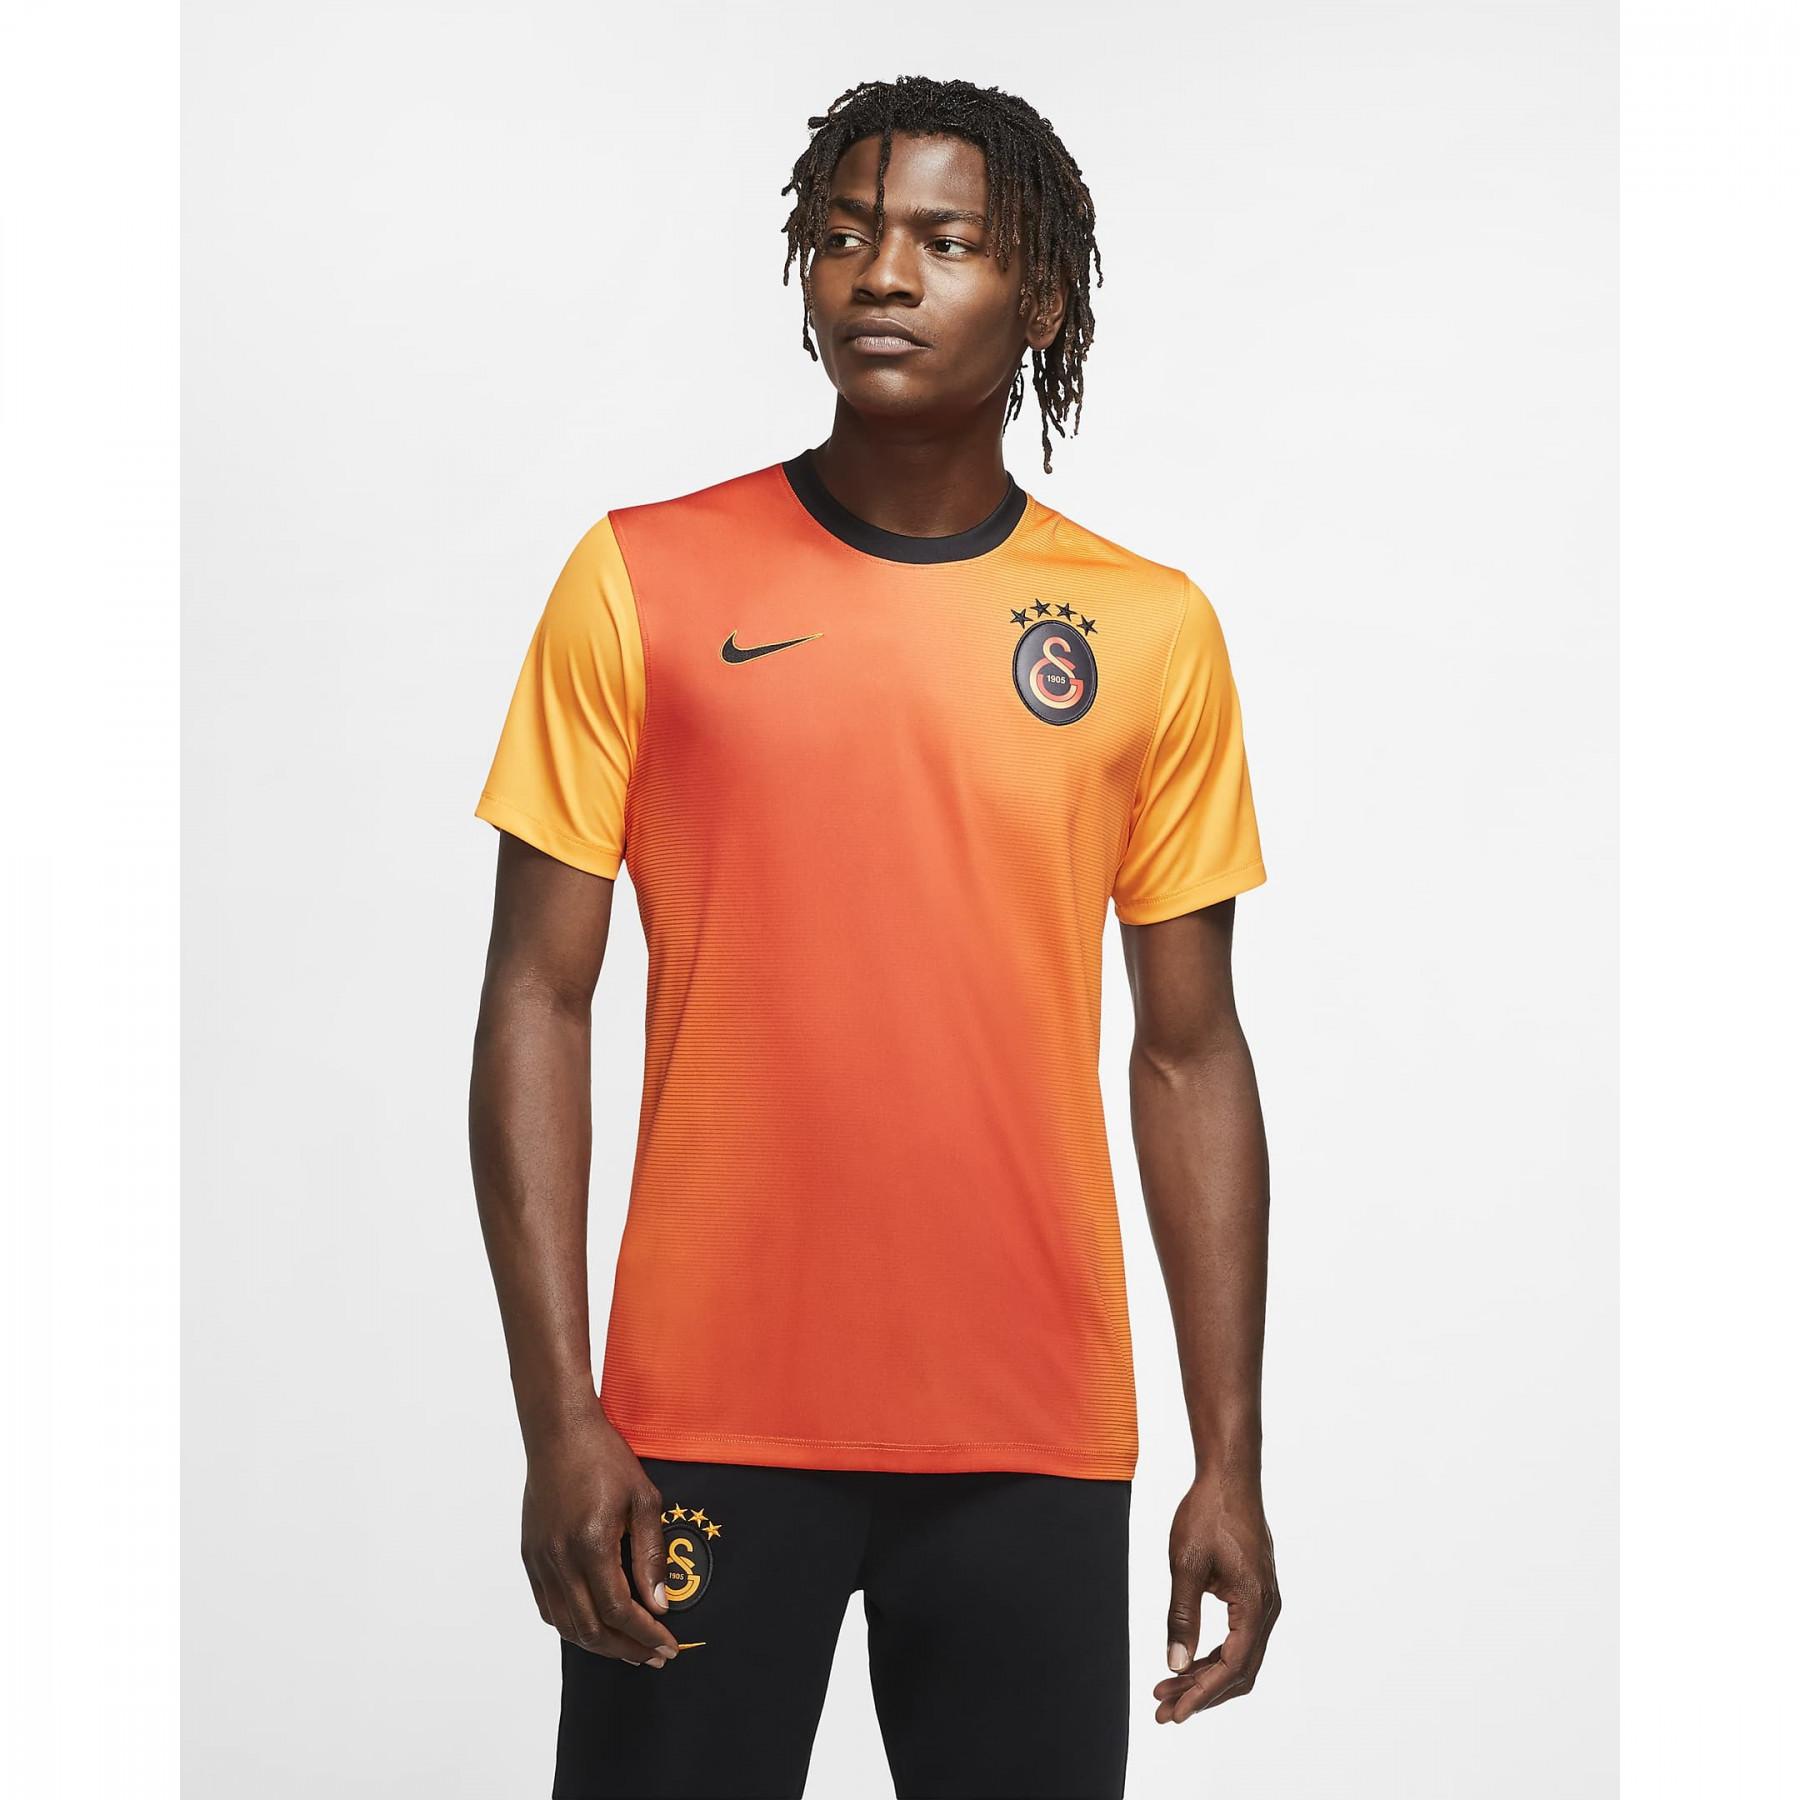 https://media.foot-store.de/catalog/product/cache/image/1800x/9df78eab33525d08d6e5fb8d27136e95/3/e/3e-haut-de-football-a-manches-courtes-galatasaray-2020-21-pour-xdcdzn.jpg